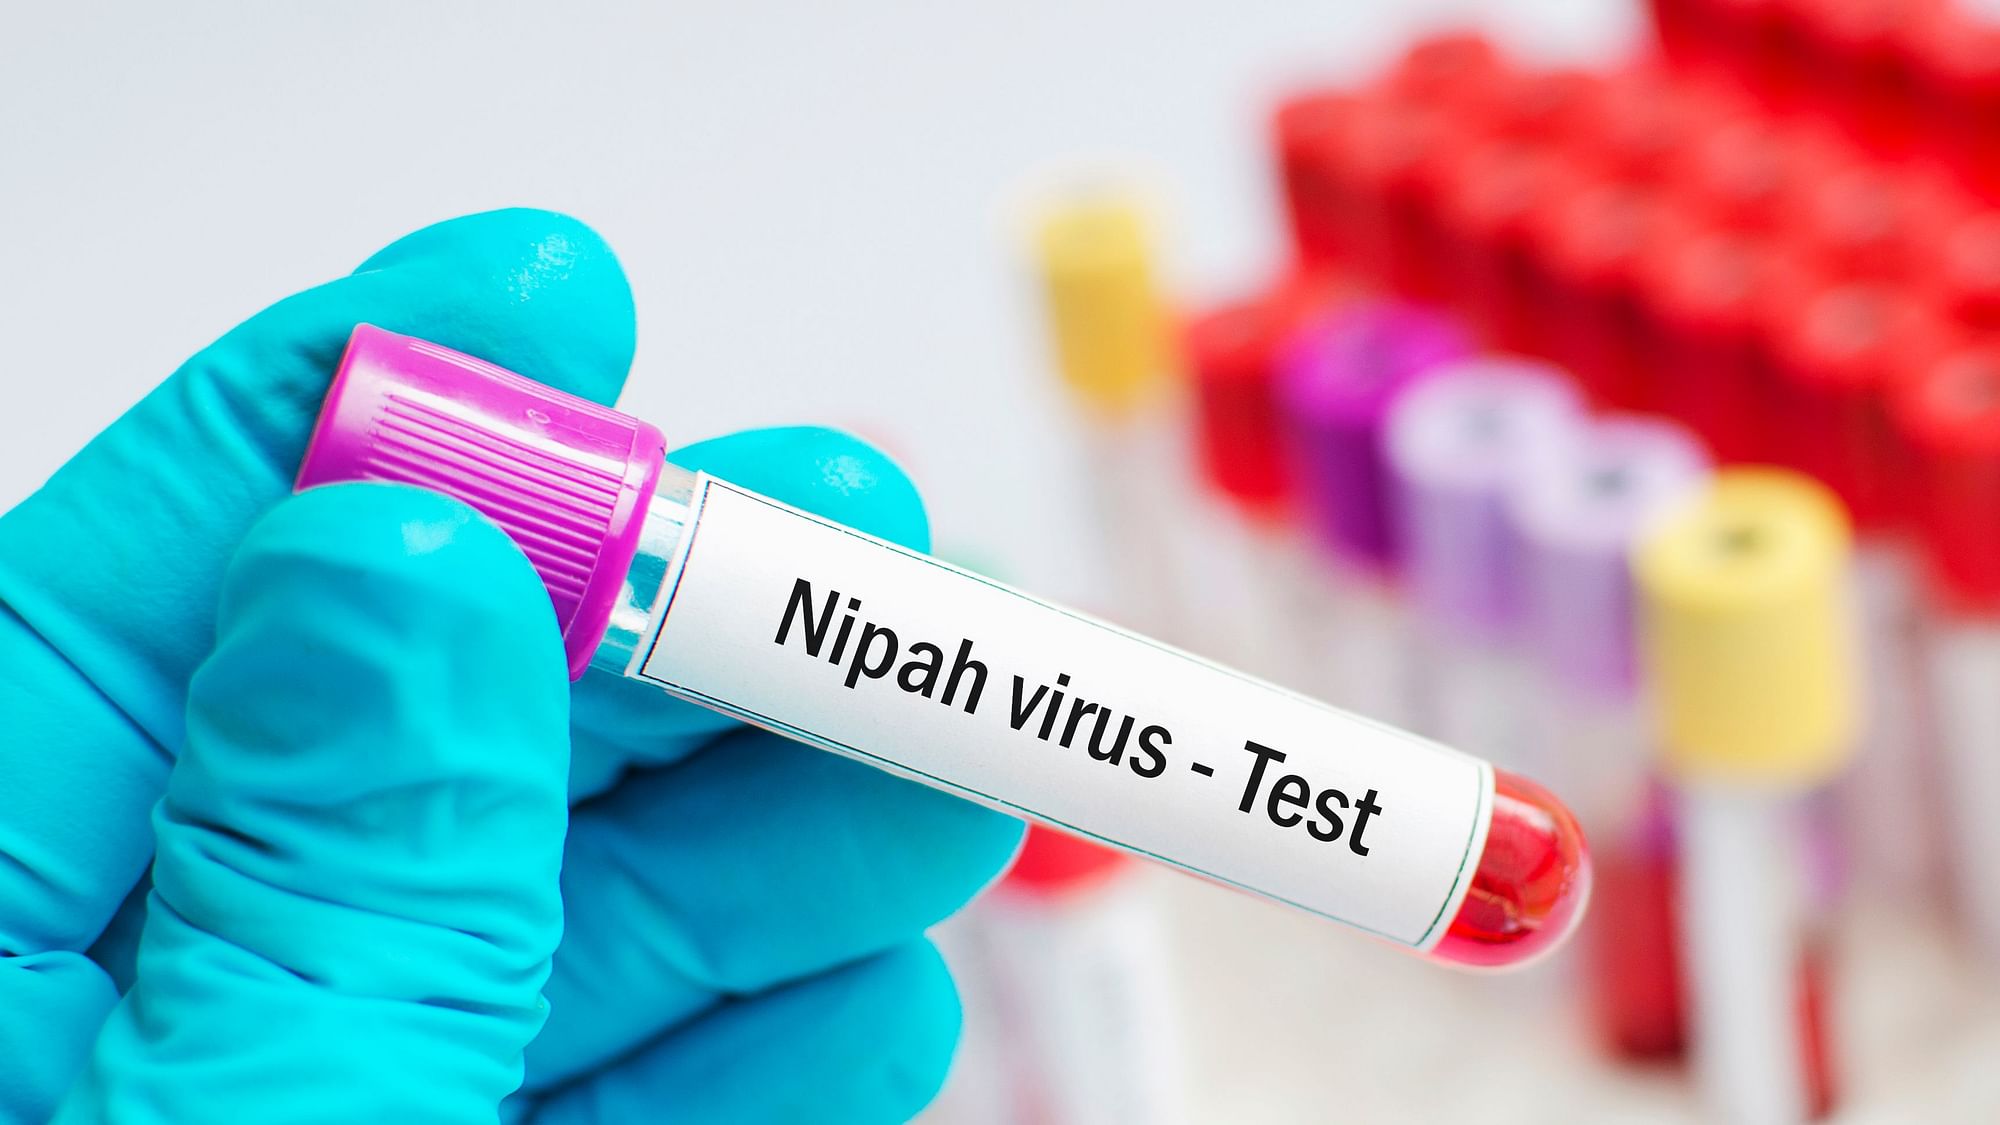 The Kerala Health Department has initiated precautionary measures to deal with the possible outbreak of Nipah virus.